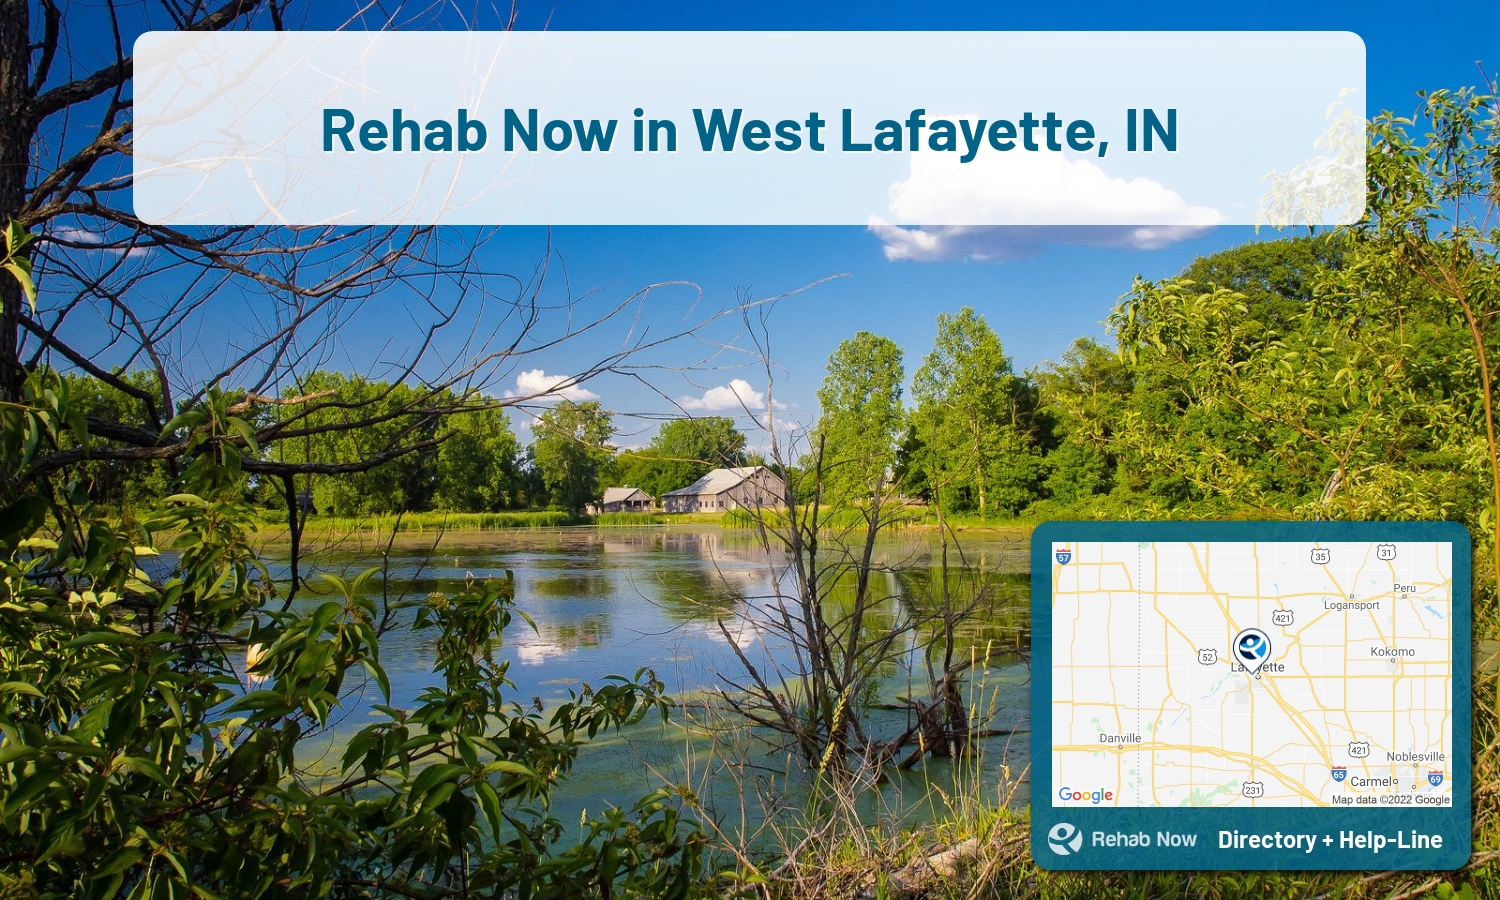 Drug rehab and alcohol treatment services near you in West Lafayette, Indiana. Need help choosing a center? Call us, free.